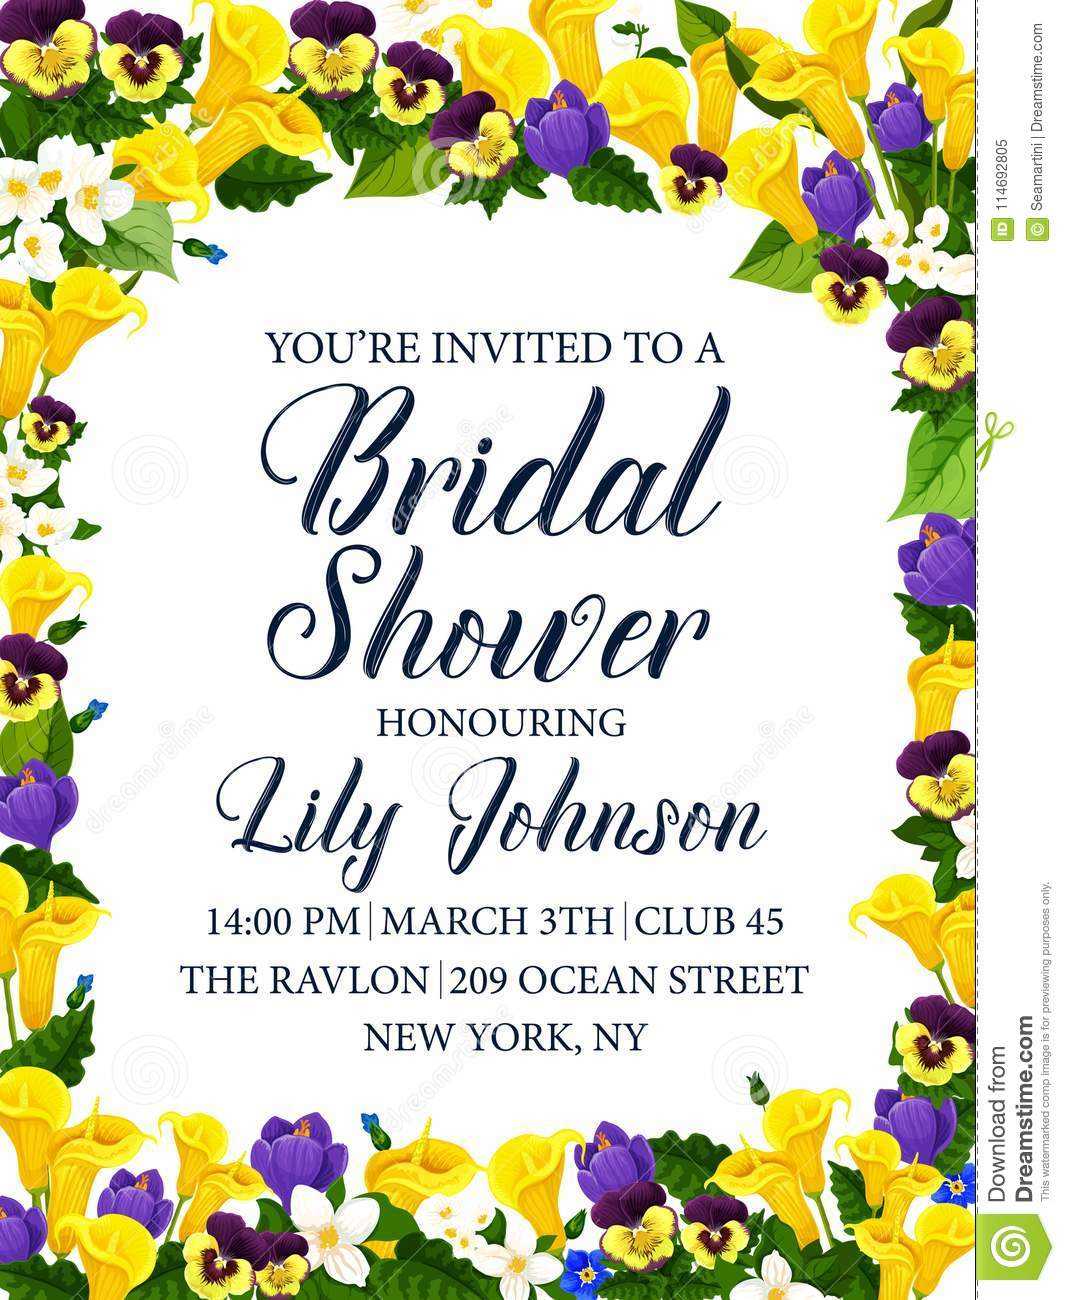 Bridal Shower Party Or Wedding Ceremony Invitation Stock For Free Bridal Shower Banner Template